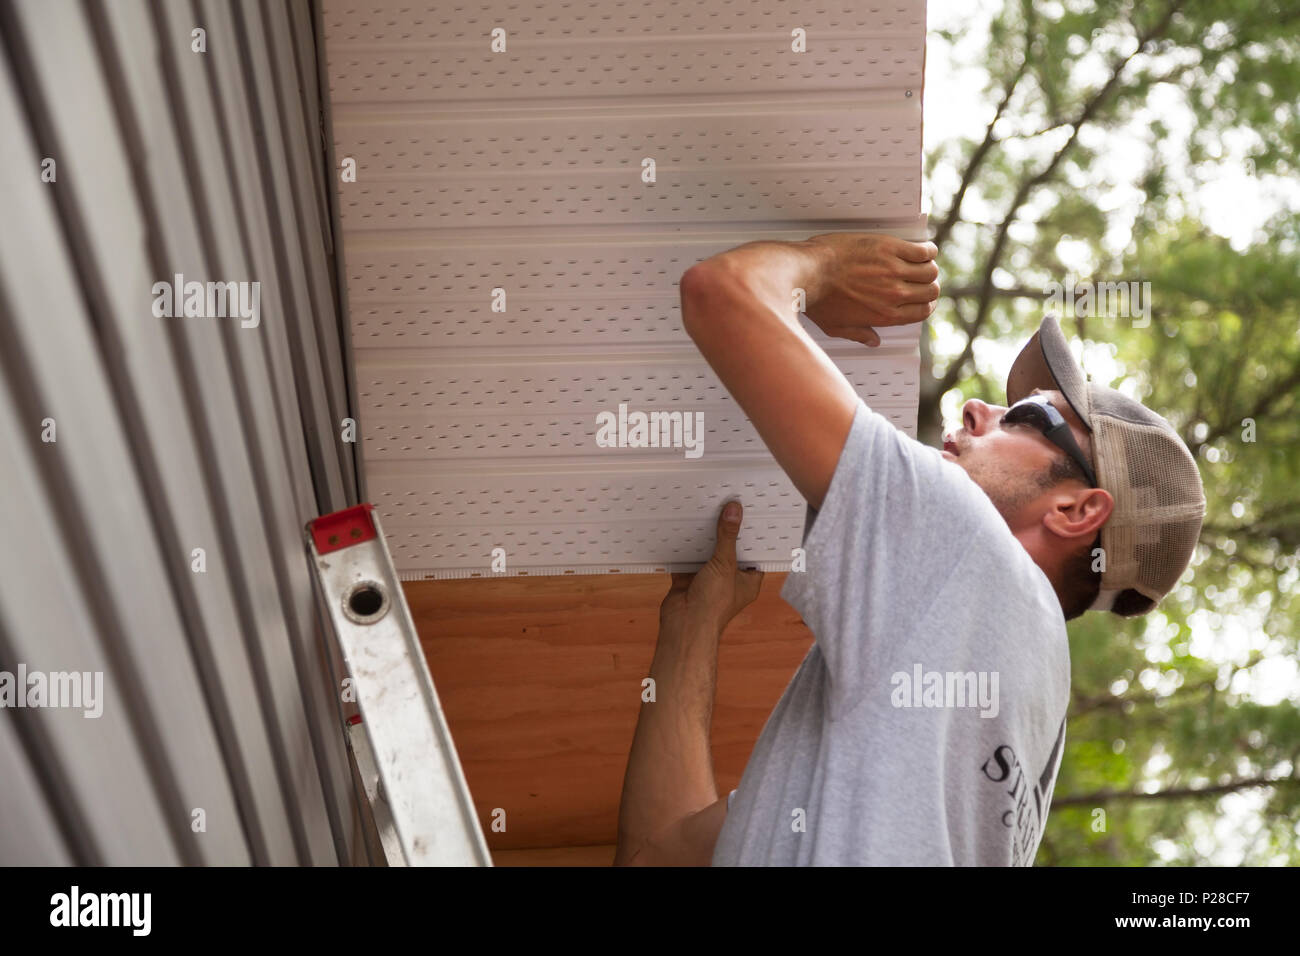 A worker installing soffits. Stock Photo